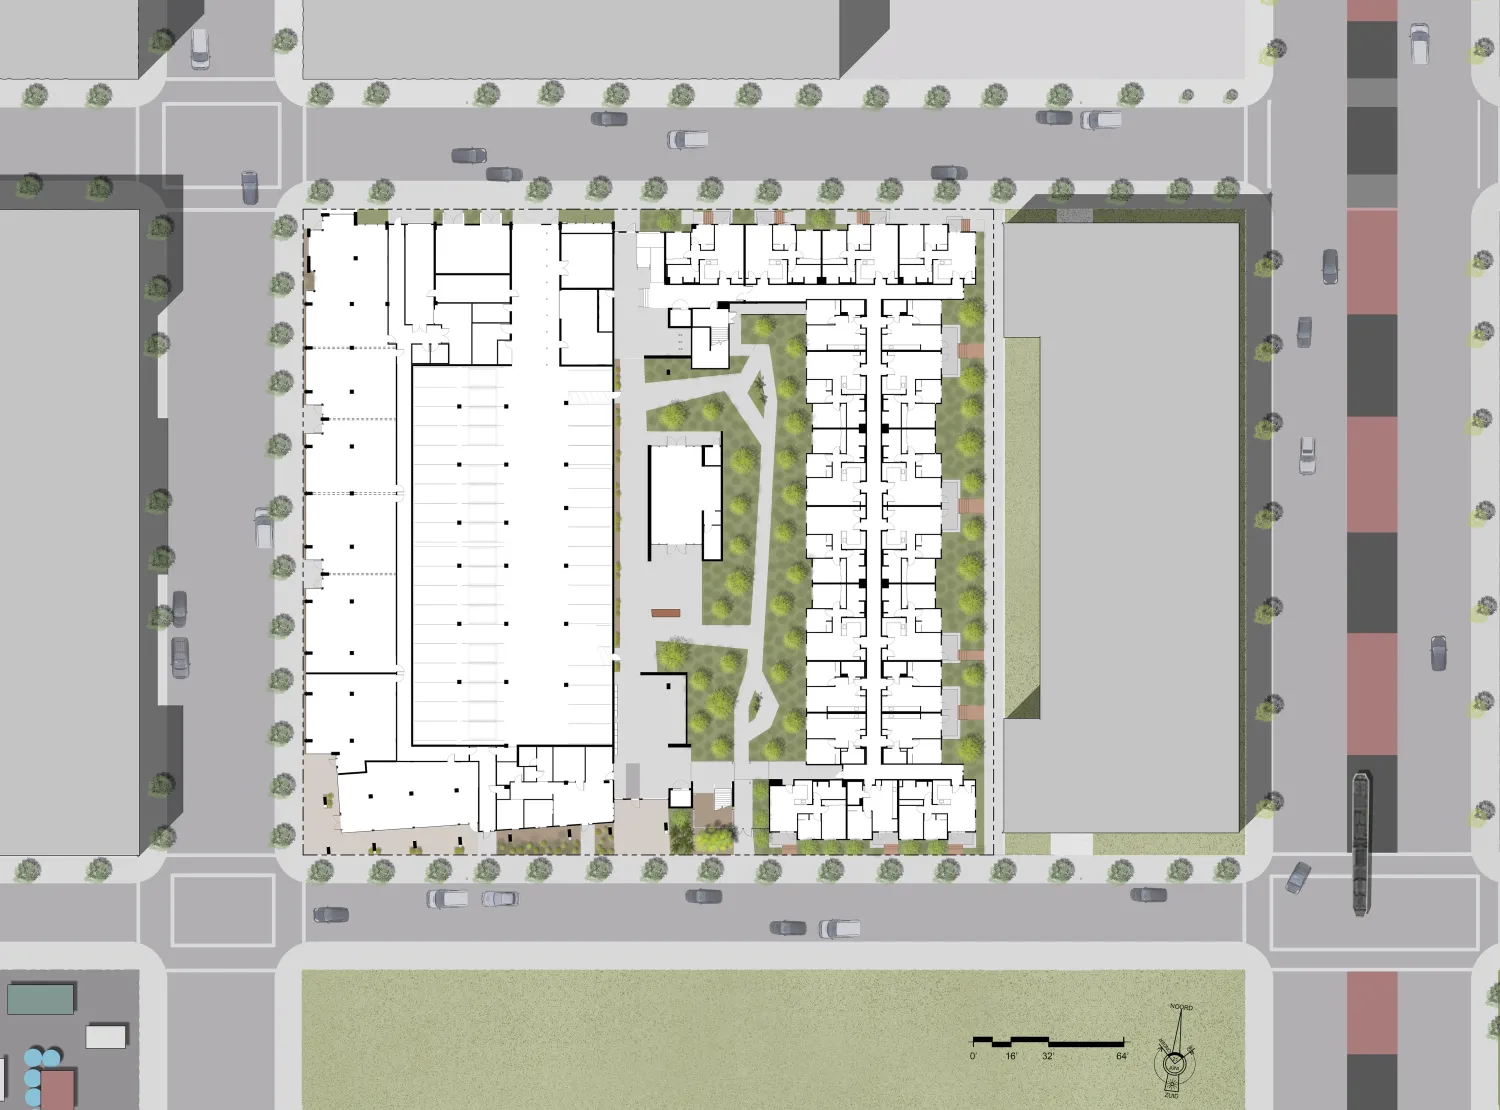 Site plan for Five88 in San Francisco.